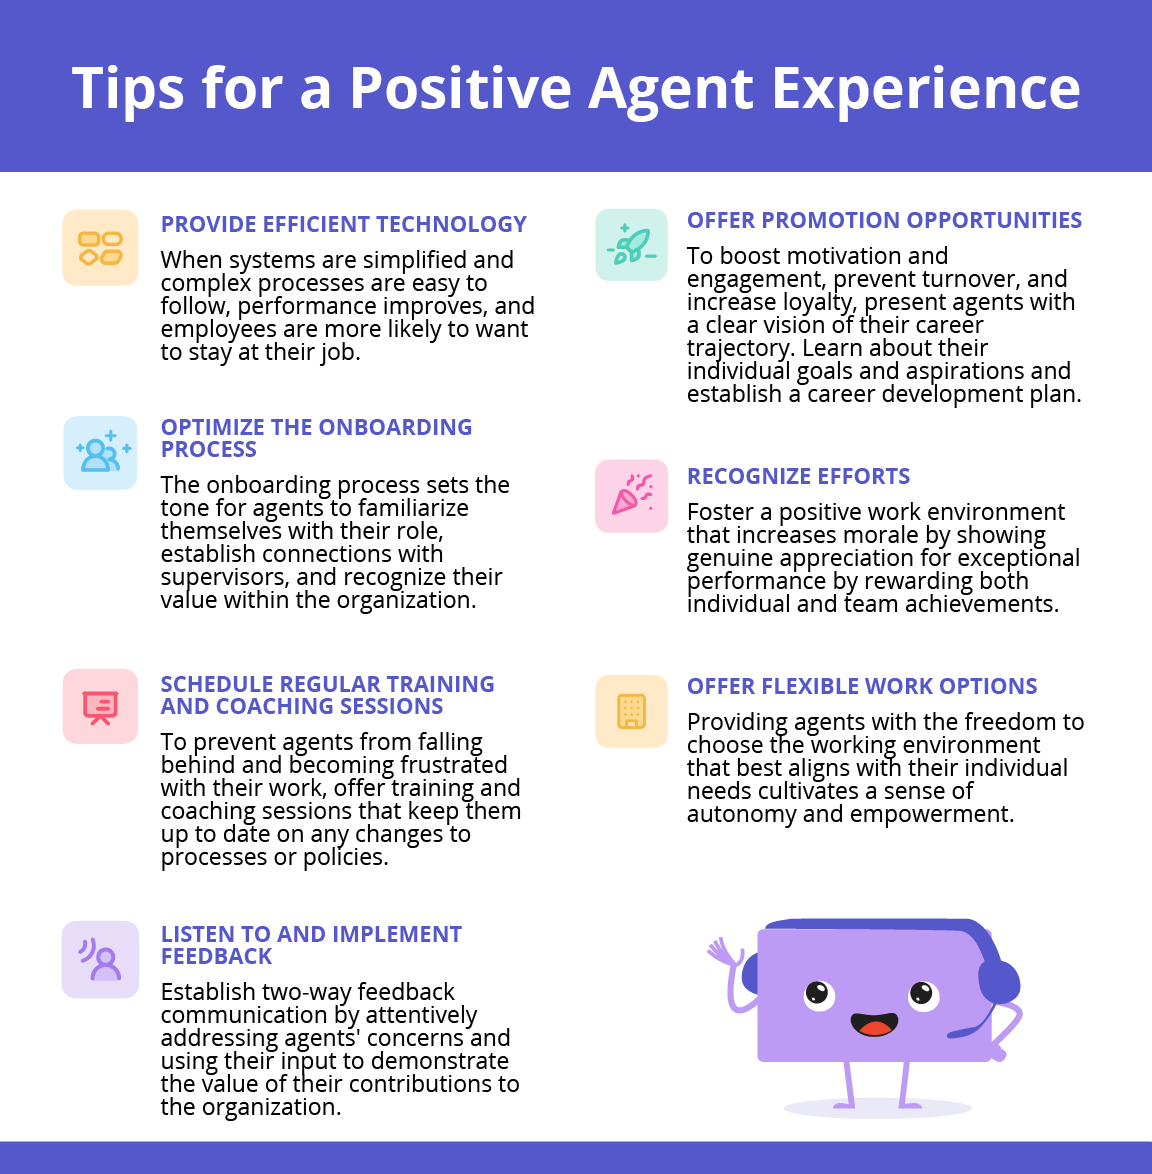 List of ways to create a positive agent experience.